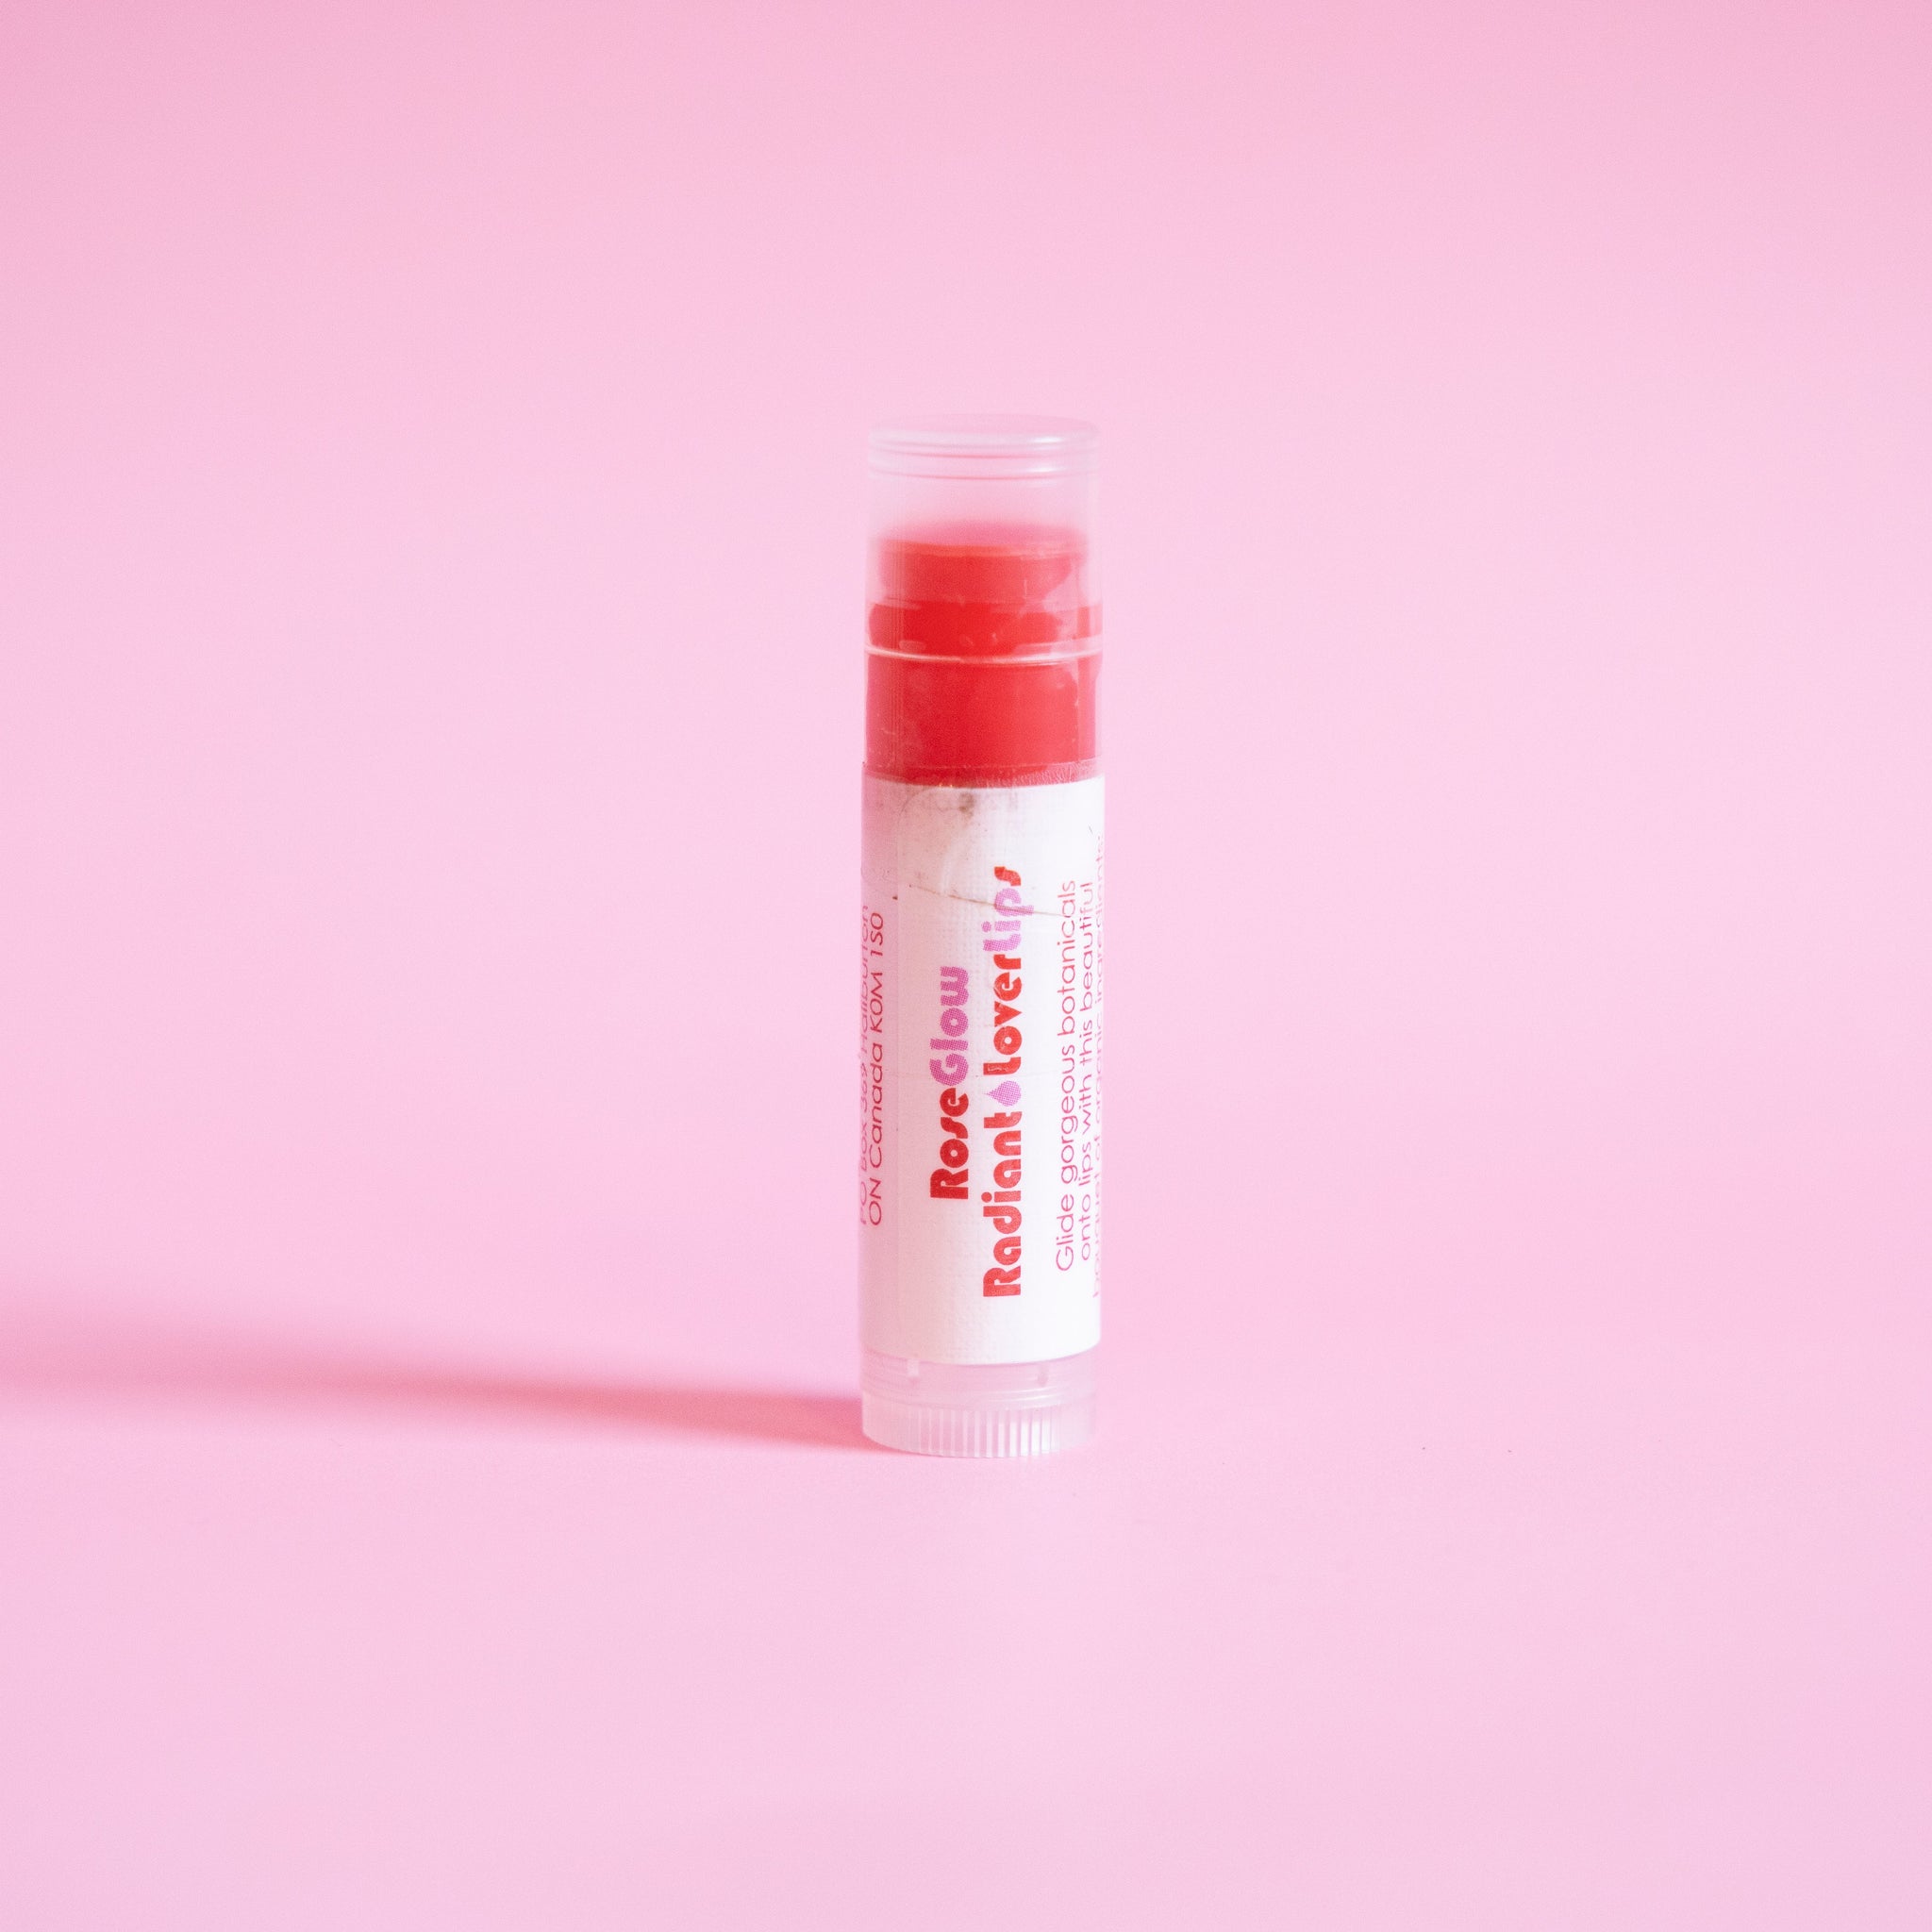 Living Libations Rose Glow Radiant Lover Lips balm. Available at Easy Tiger Toronto.